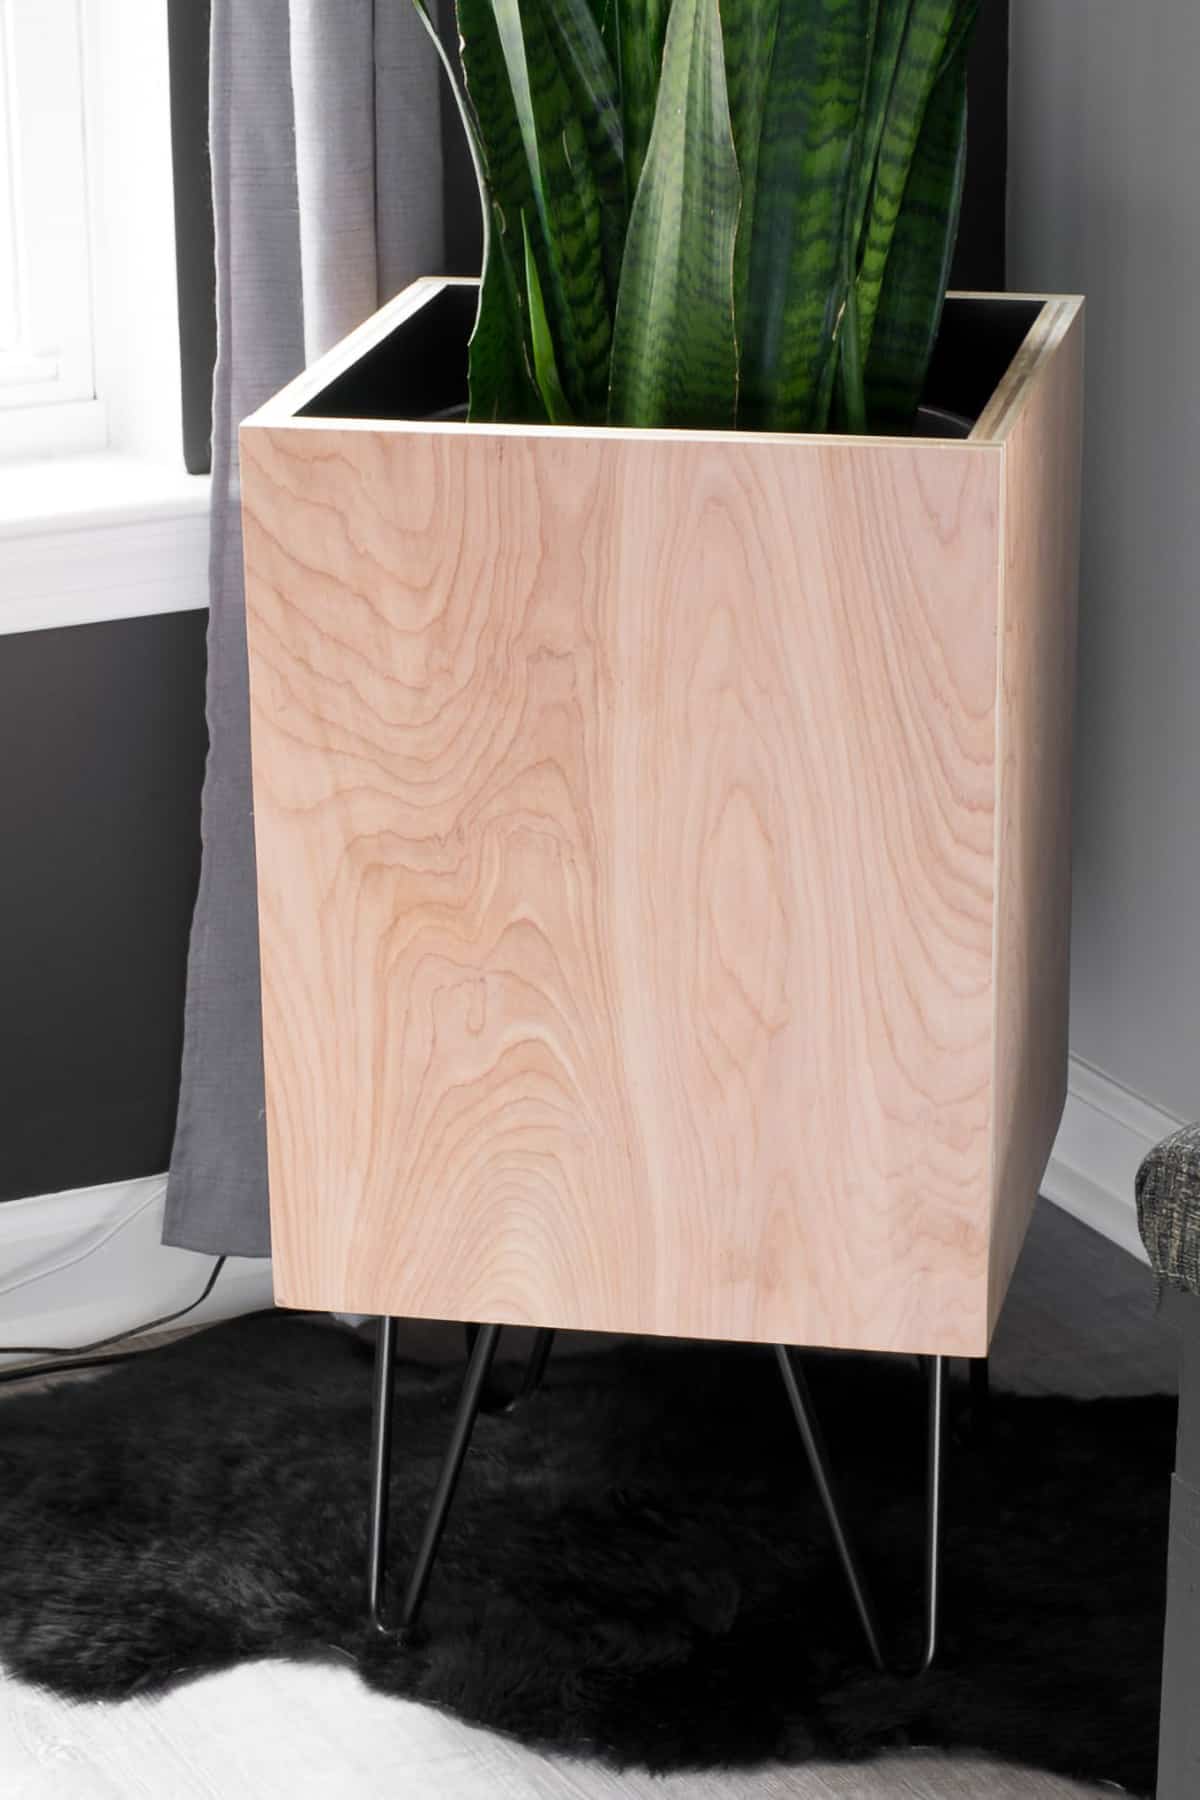 Large modern plywood planter with hairpin legs on cowhide rug in window.